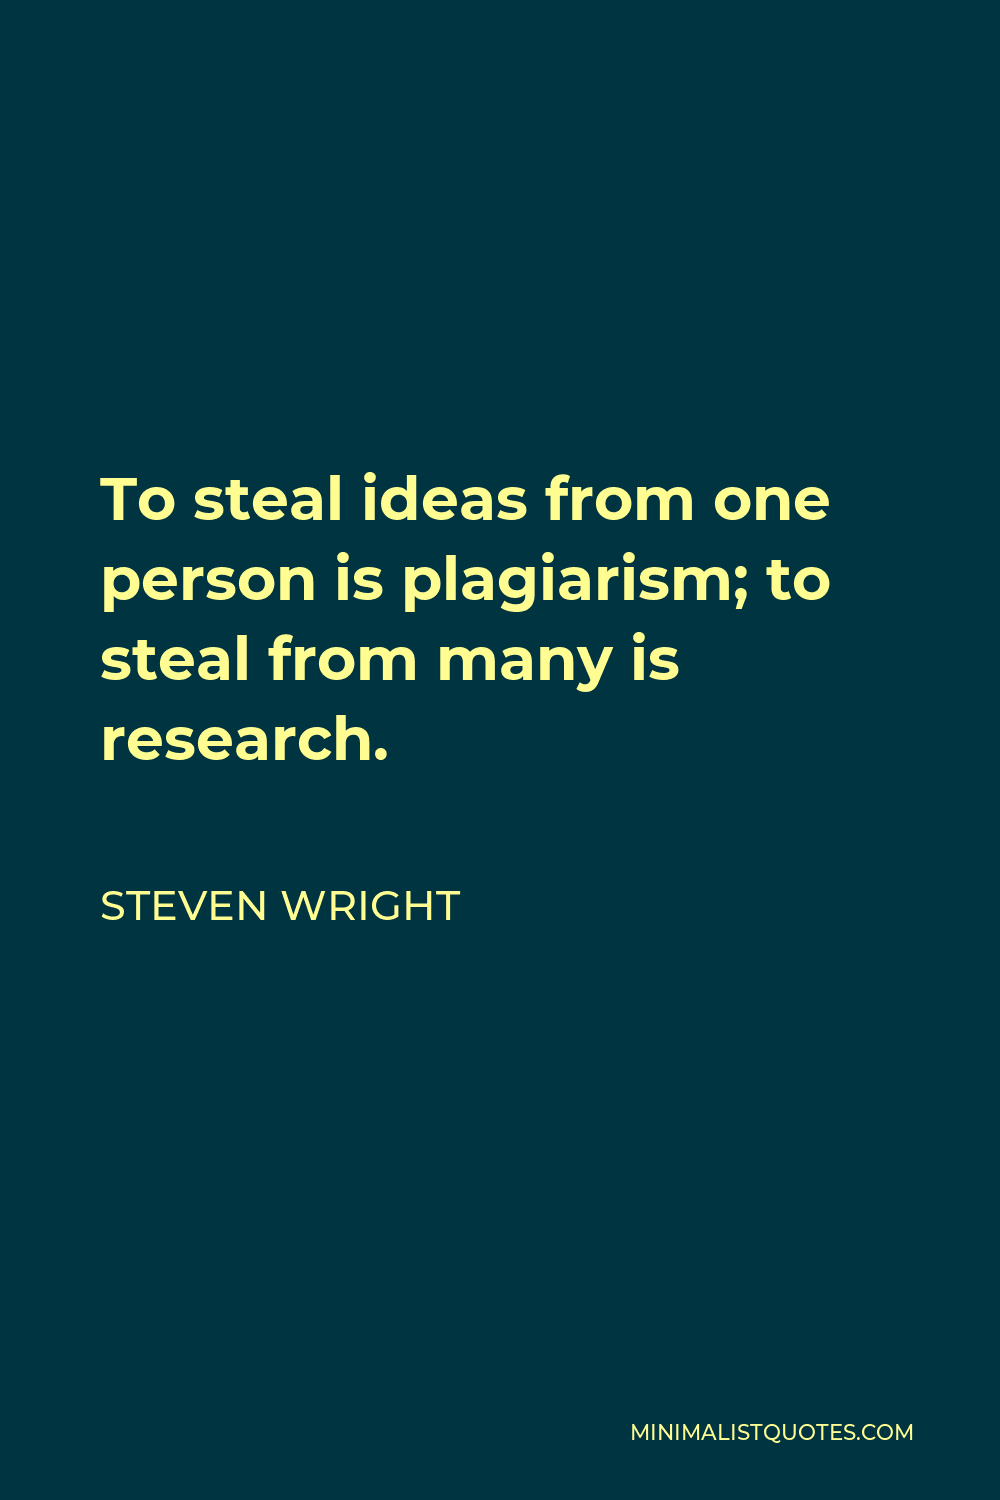 Steven Wright Quote - To steal ideas from one person is plagiarism; to steal from many is research.